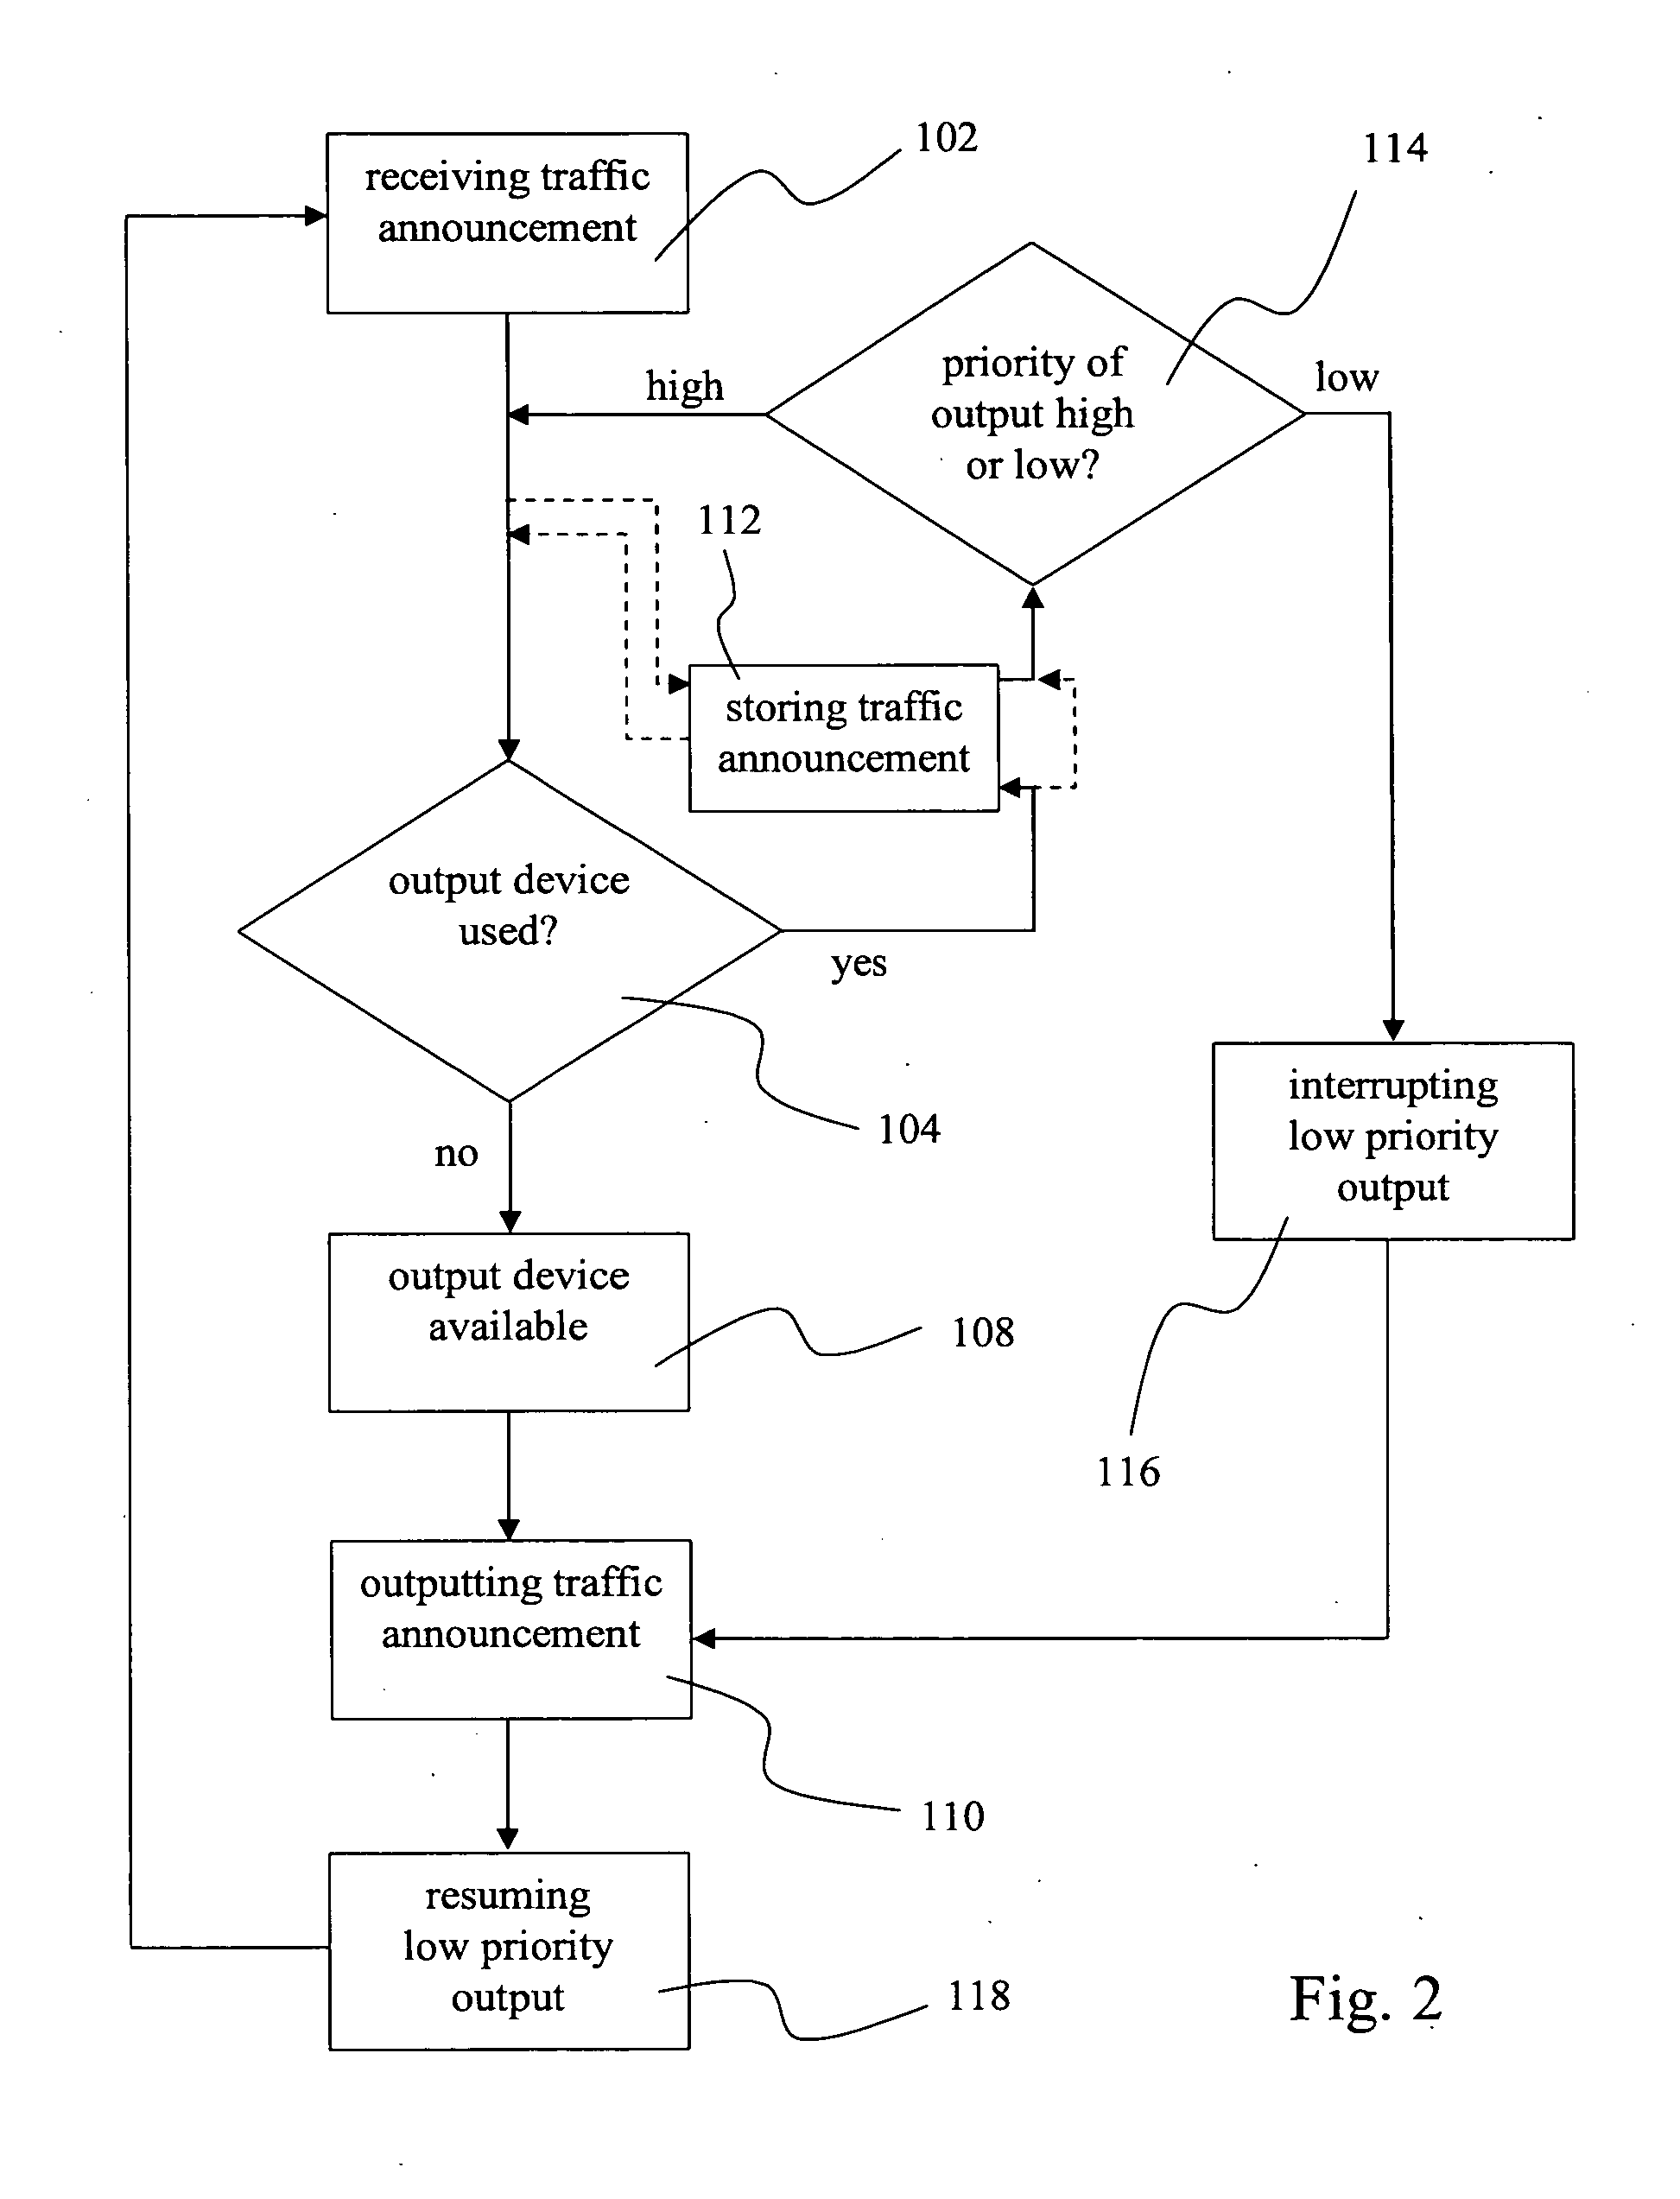 Method and system for context sensitive presenting of traffic announcements